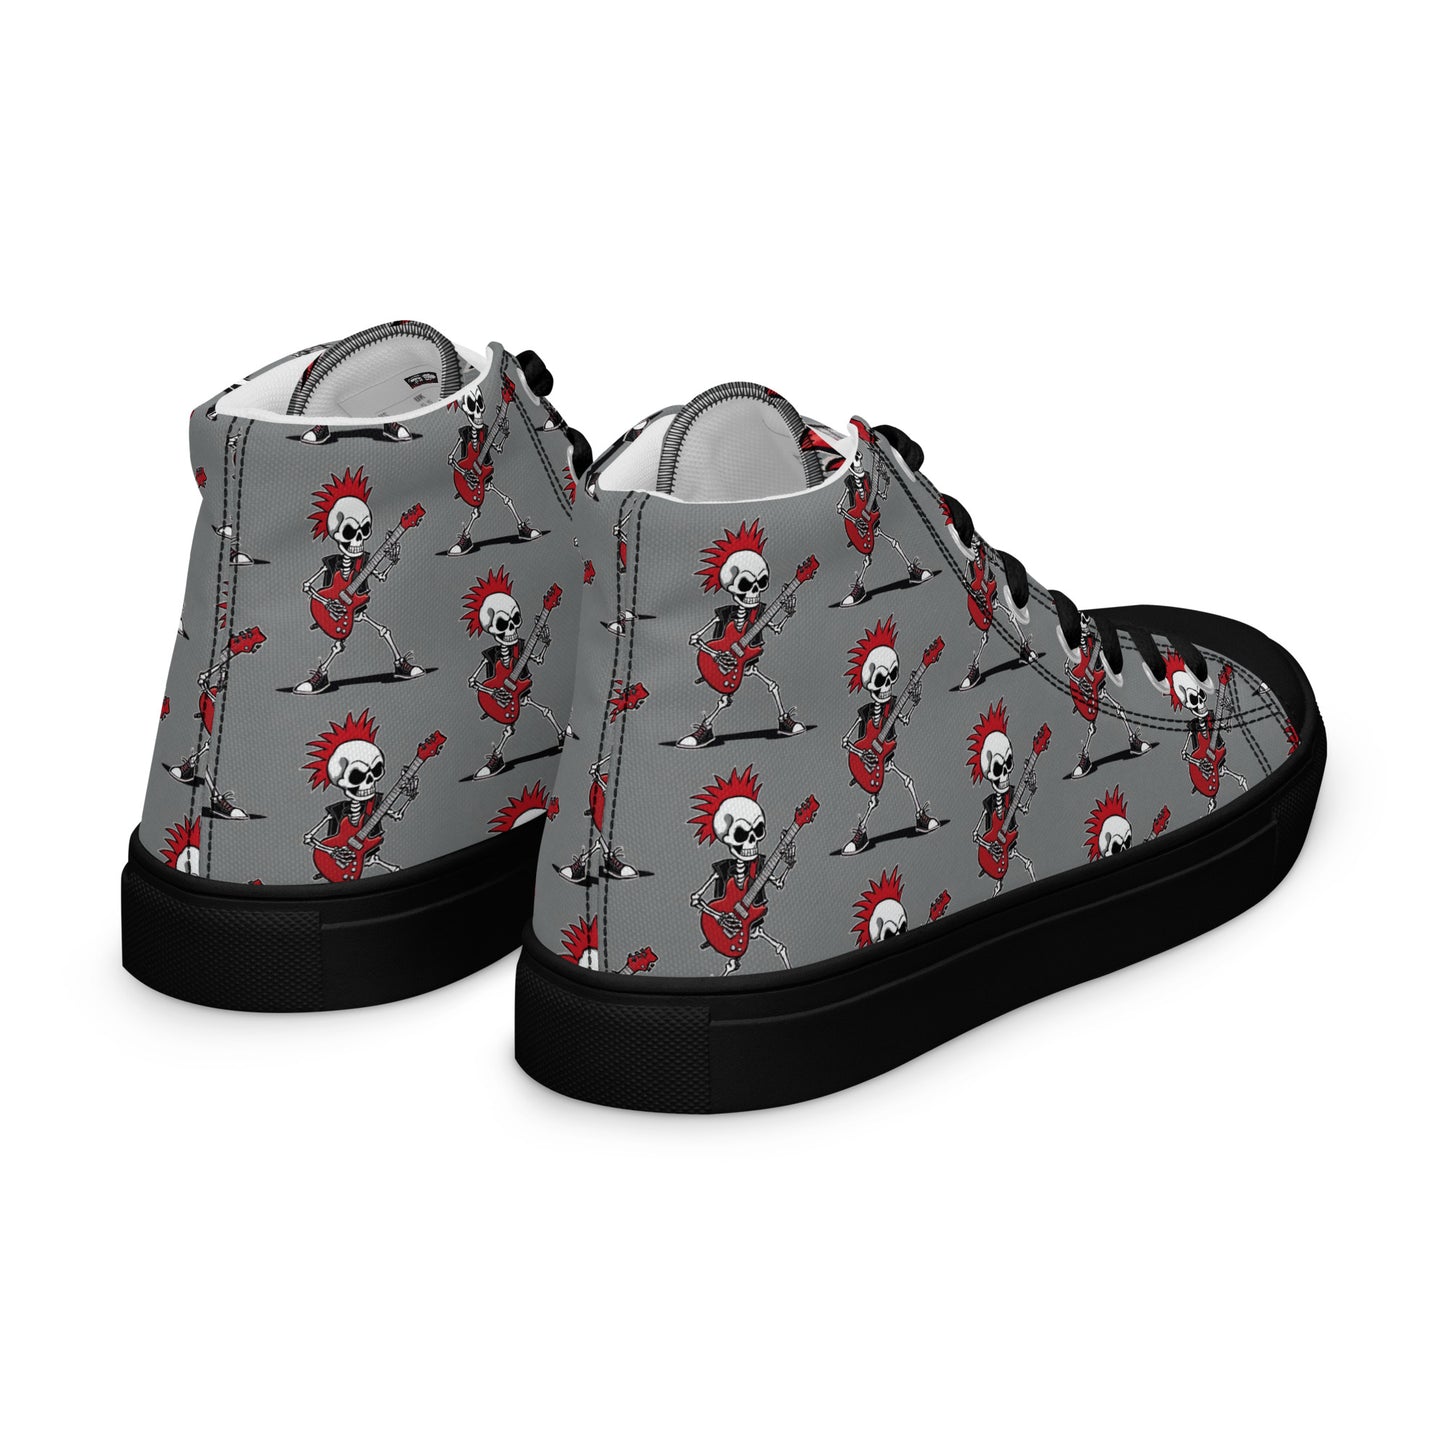 WOMEN'S RED'S GUITAR HIGH TOP CANVAS SHOES